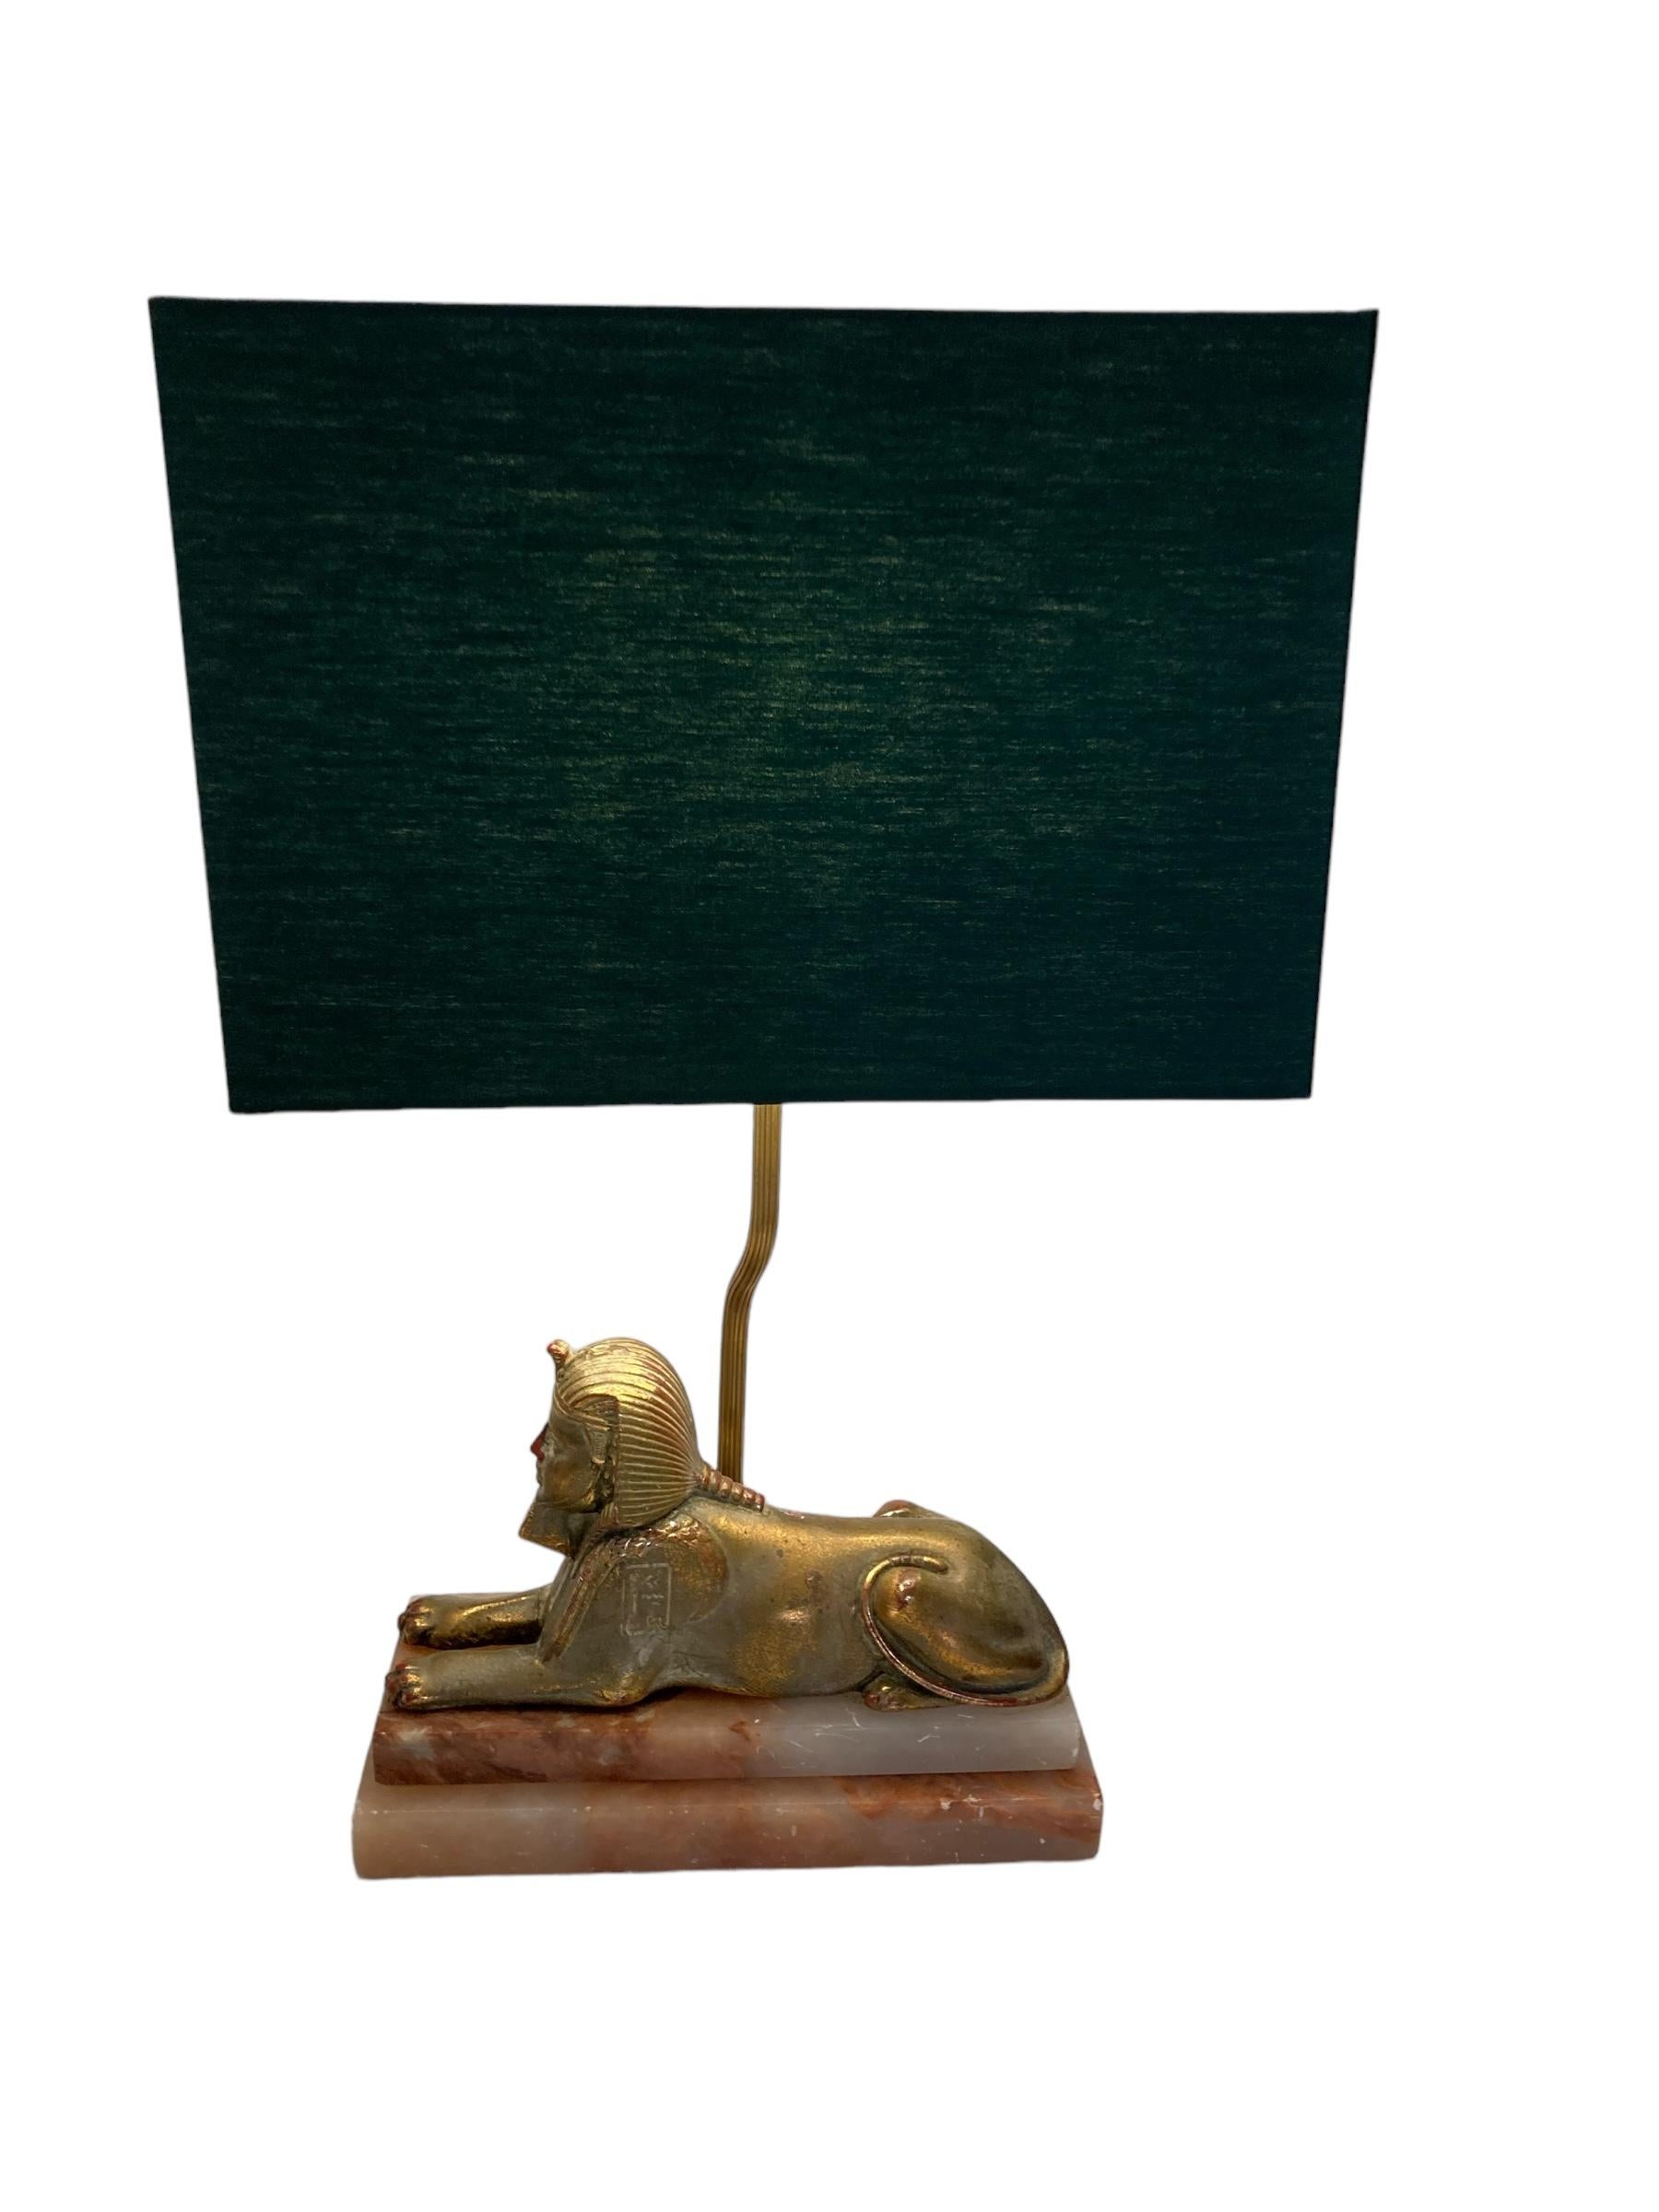 A Pair of Art Deco Egytian Sphinx Table Lamps on a Marble Base Dark Green Shades For Sale 2